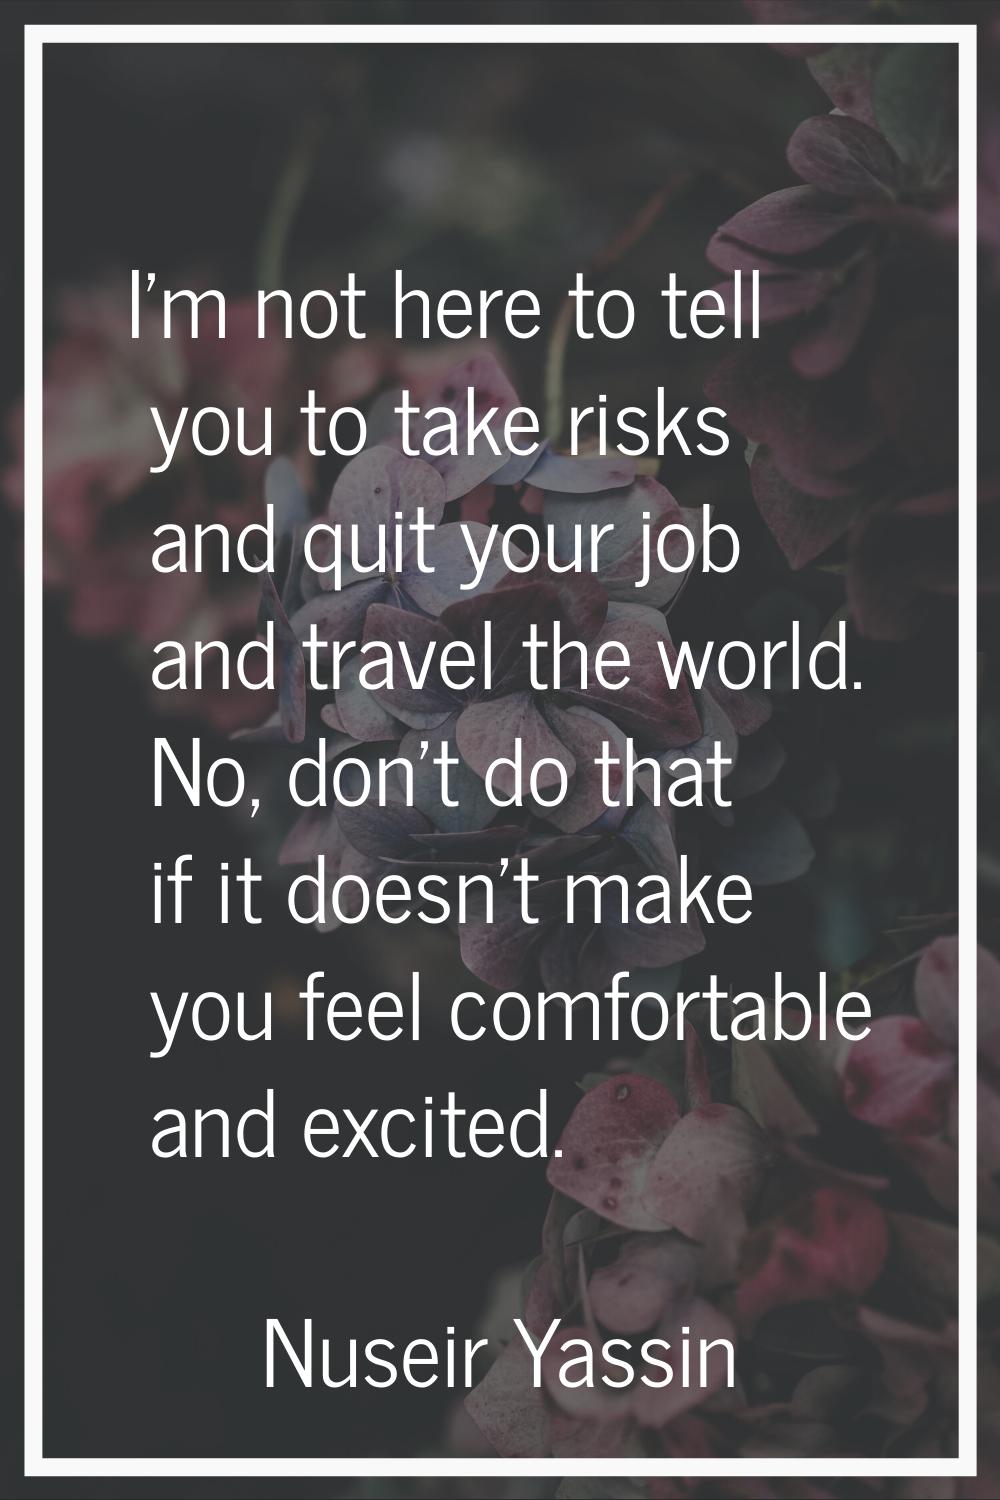 I'm not here to tell you to take risks and quit your job and travel the world. No, don't do that if